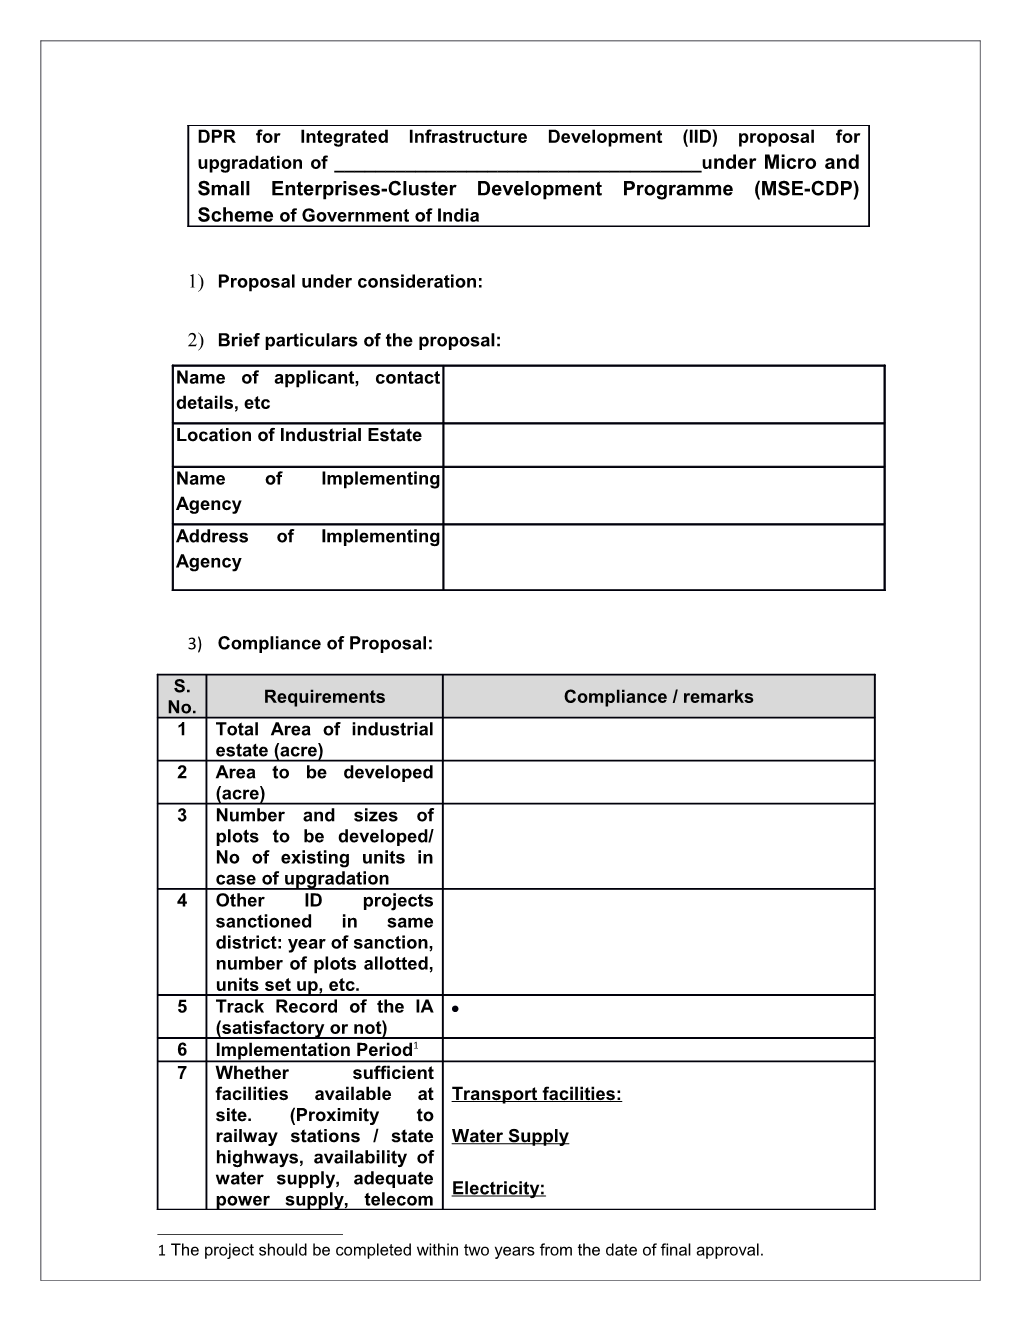 Techno-Economic Appraisal Format of Infrastructure Development (ID) Proposal for Setting